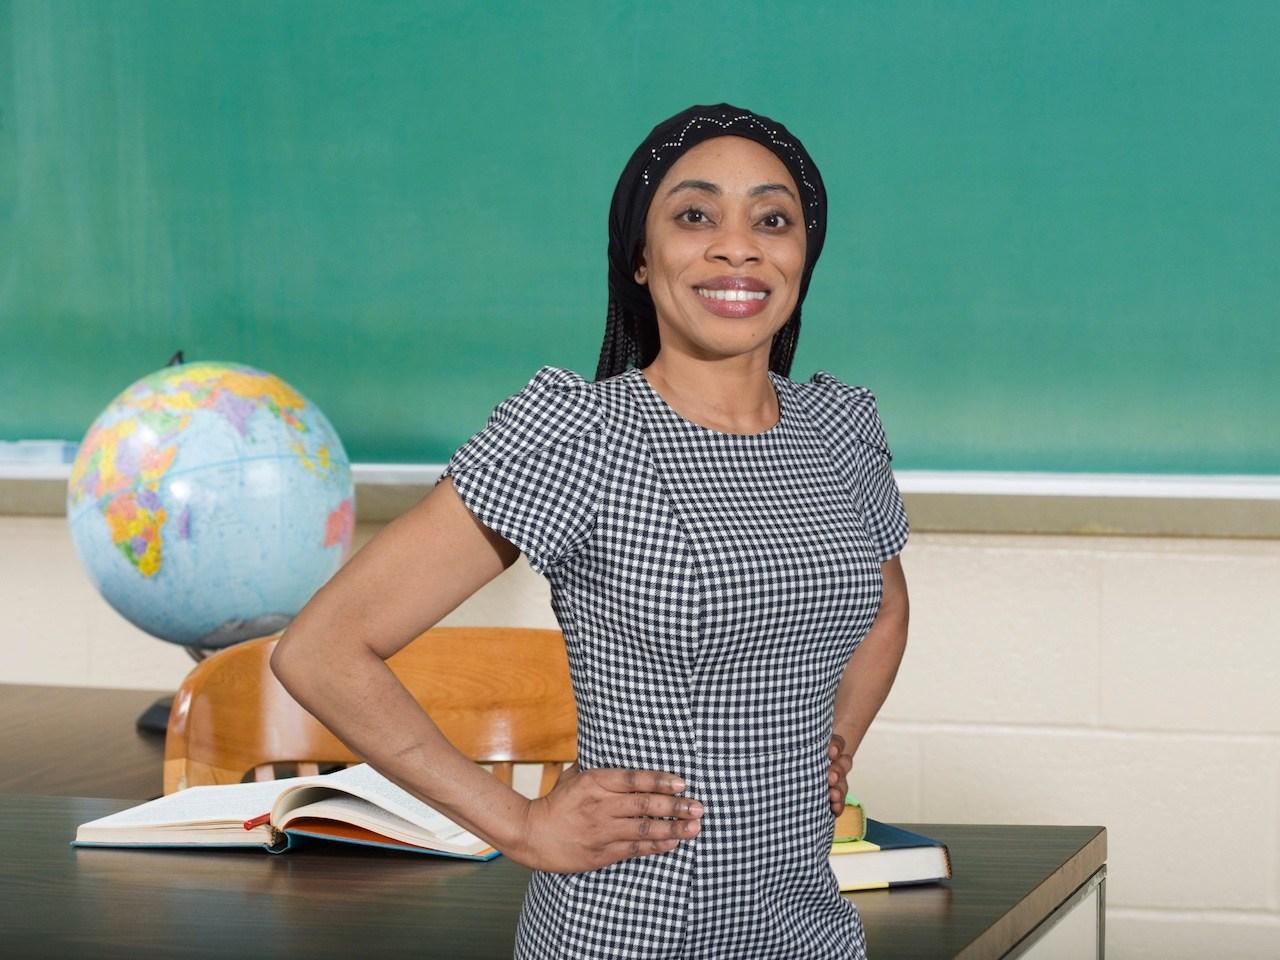 Dr. Anne Keke standing in front of a desk with a globe and smiling